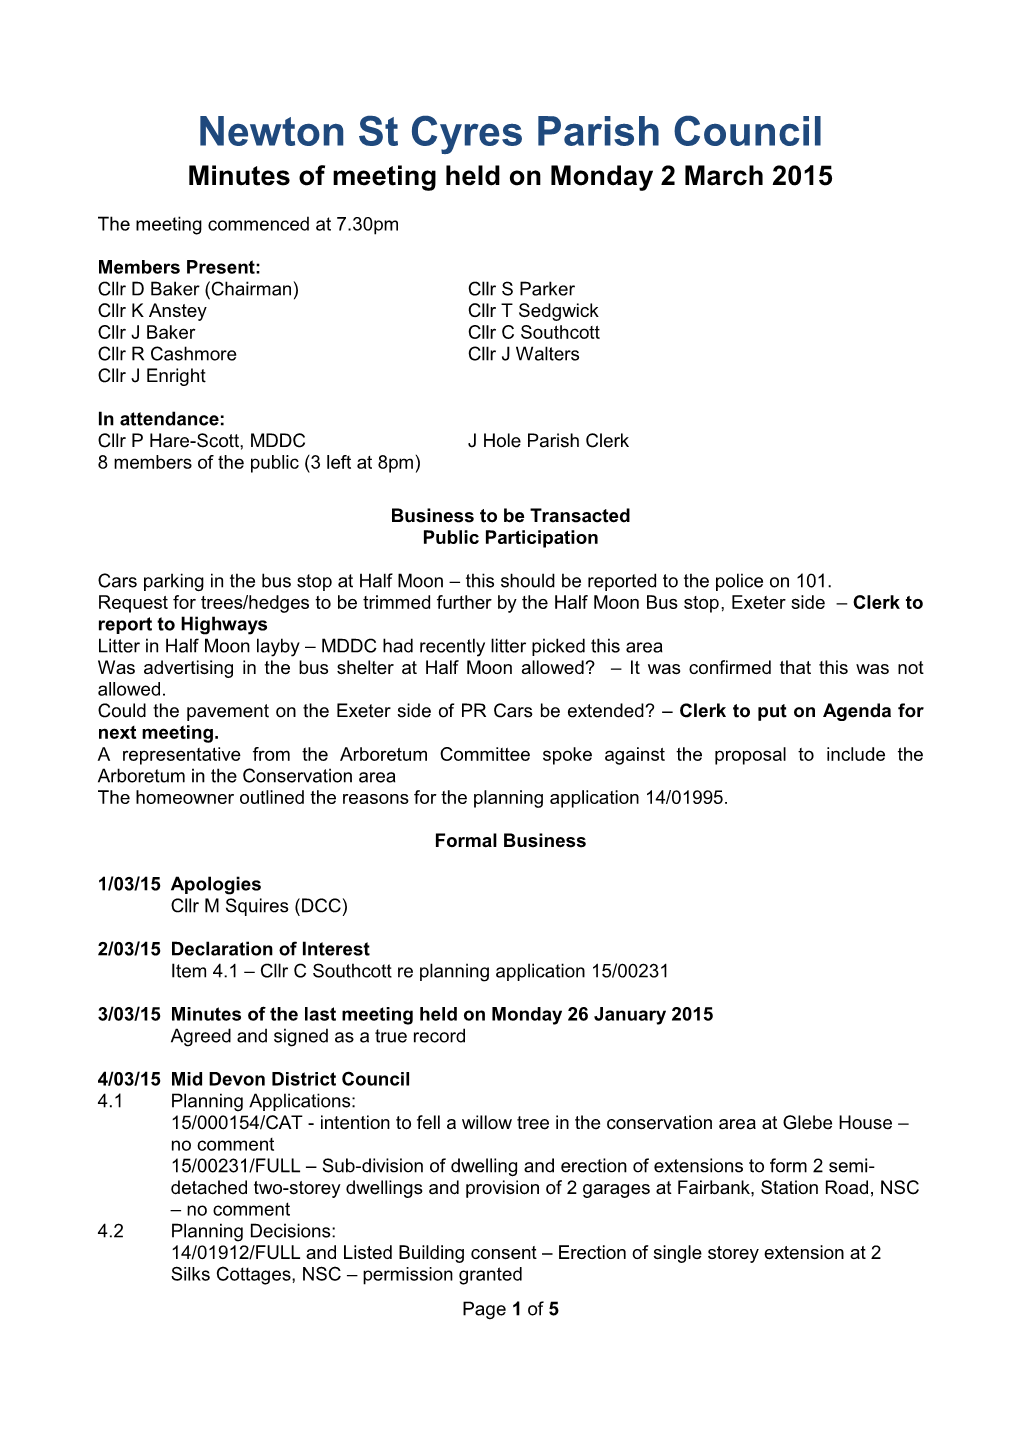 Newton St Cyres Parish Council Minutes of Meeting Held on Monday 2 March 2015